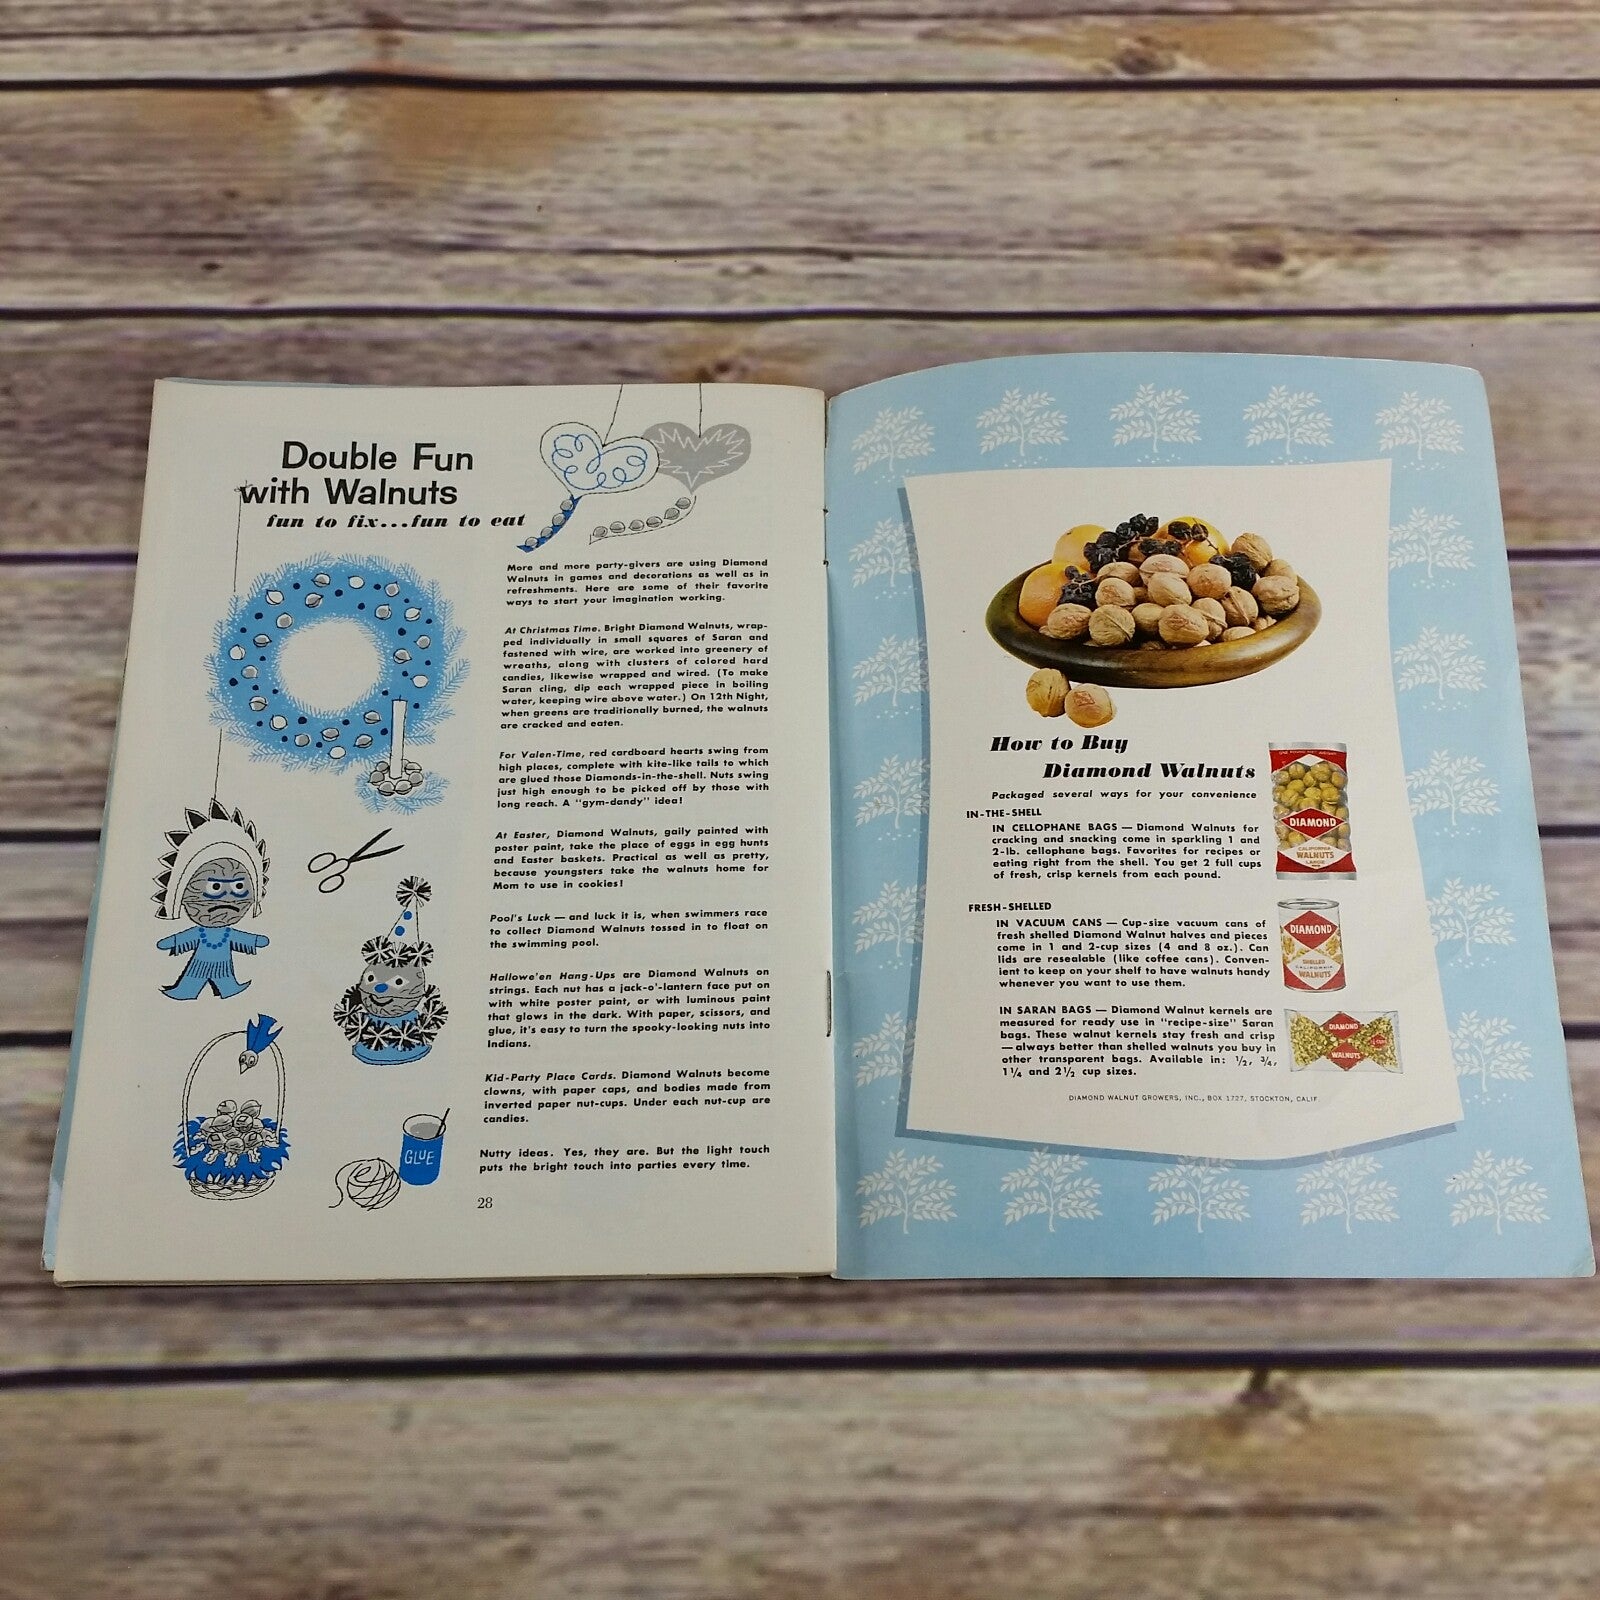 Vintage Cookbook The New Walnut Cook Book Diamond Walnut Recipes 1960s Promo Paperback Red Booklet - At Grandma's Table